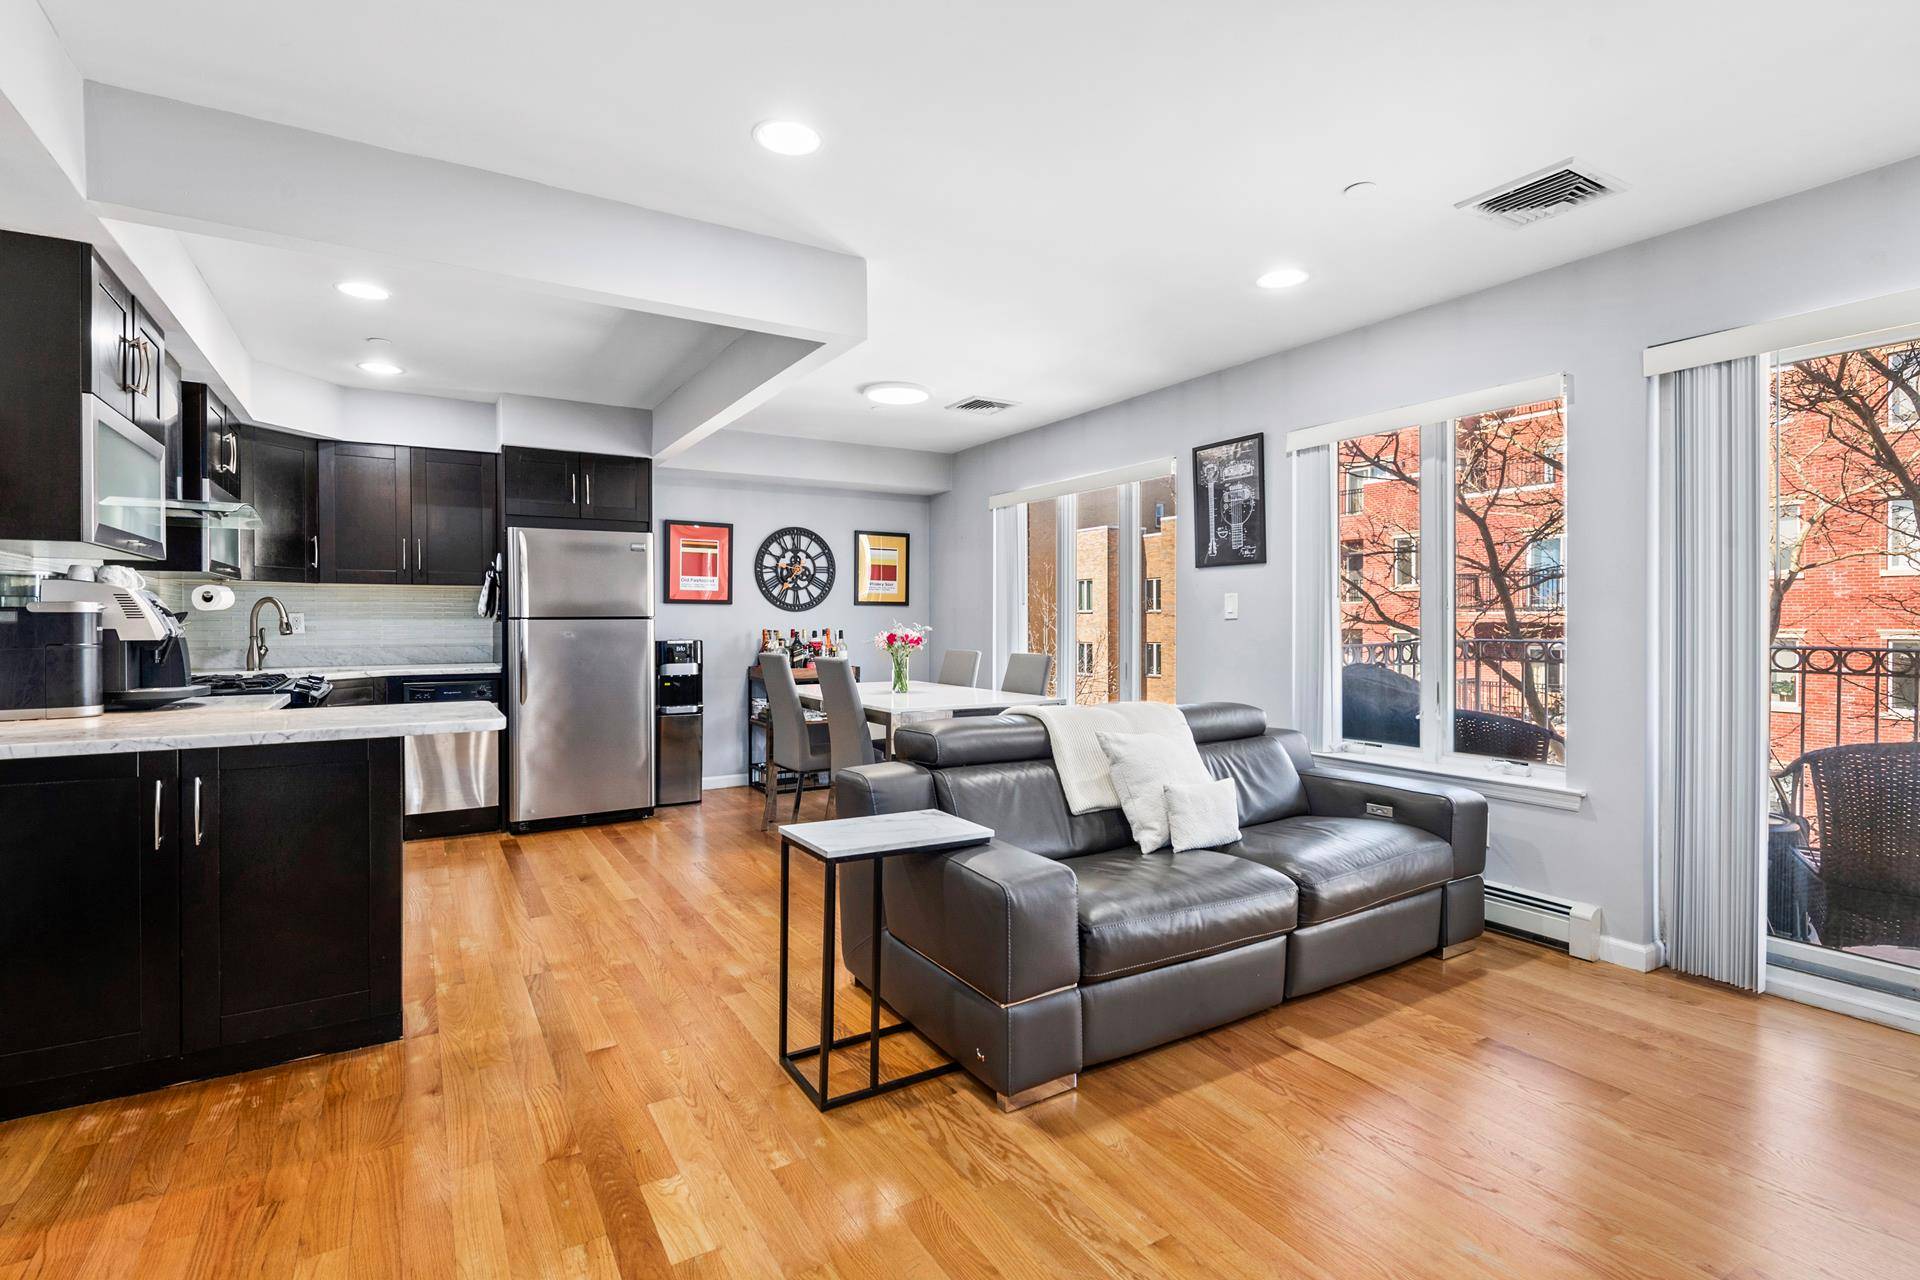 Introducing a sophisticated 1 bedroom, 1 bathroom condo, nestled in the vibrant neighborhood of Astoria.